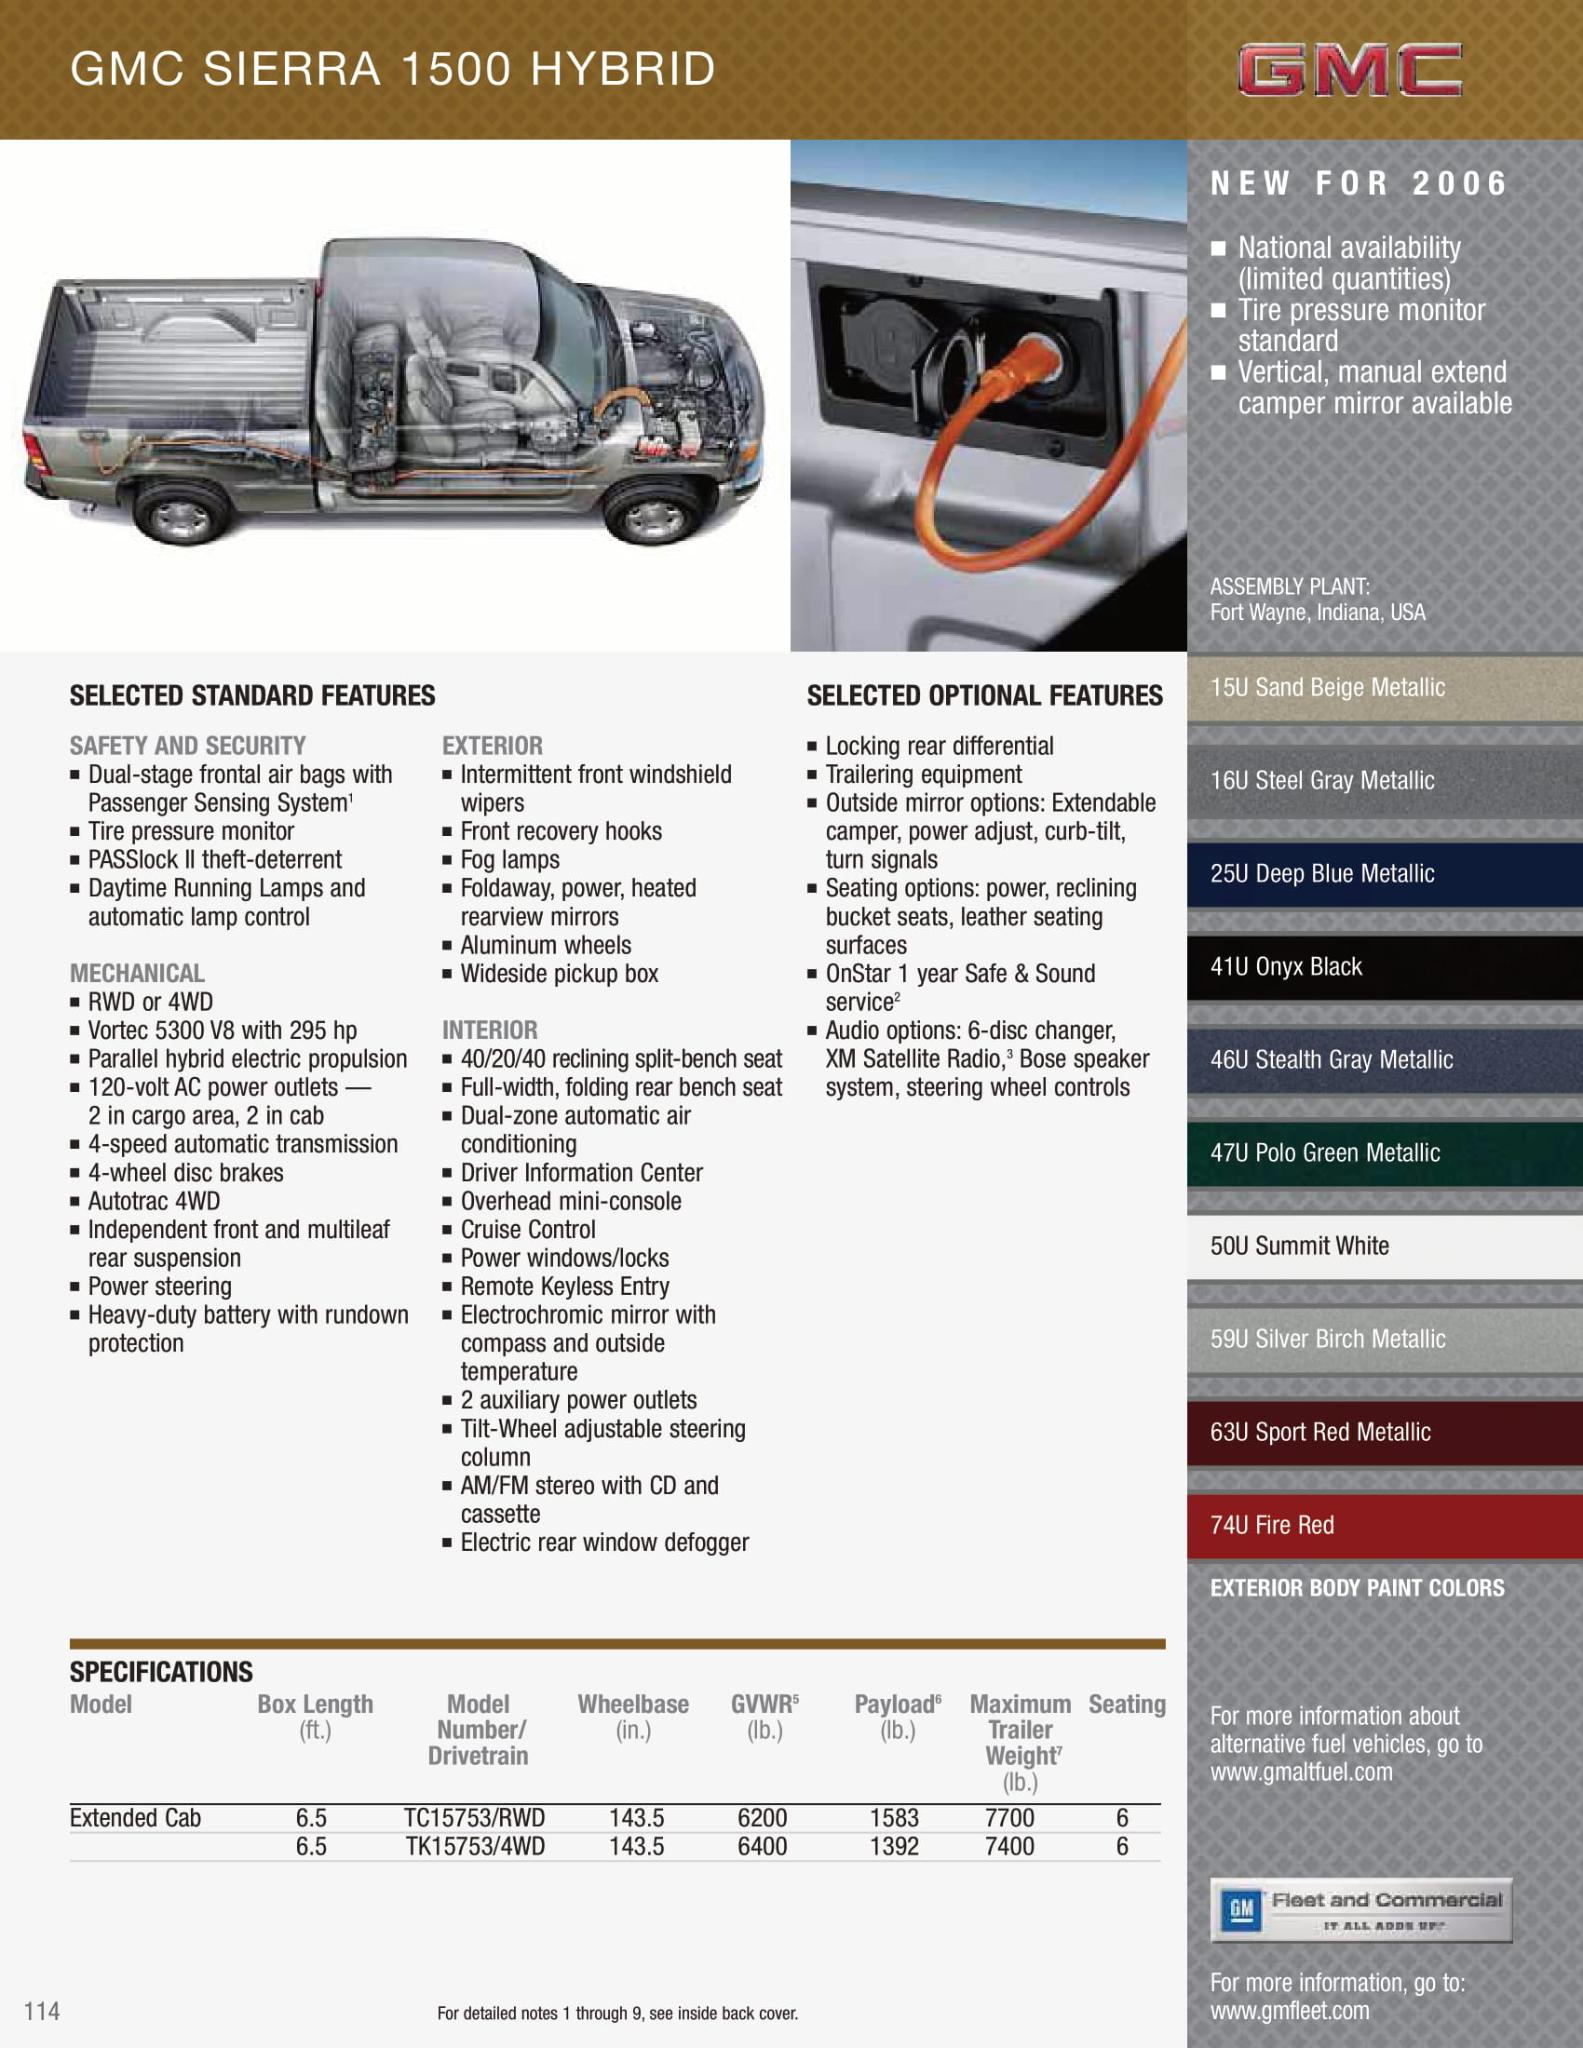 2006 GMC Paint Codes and Color Chart